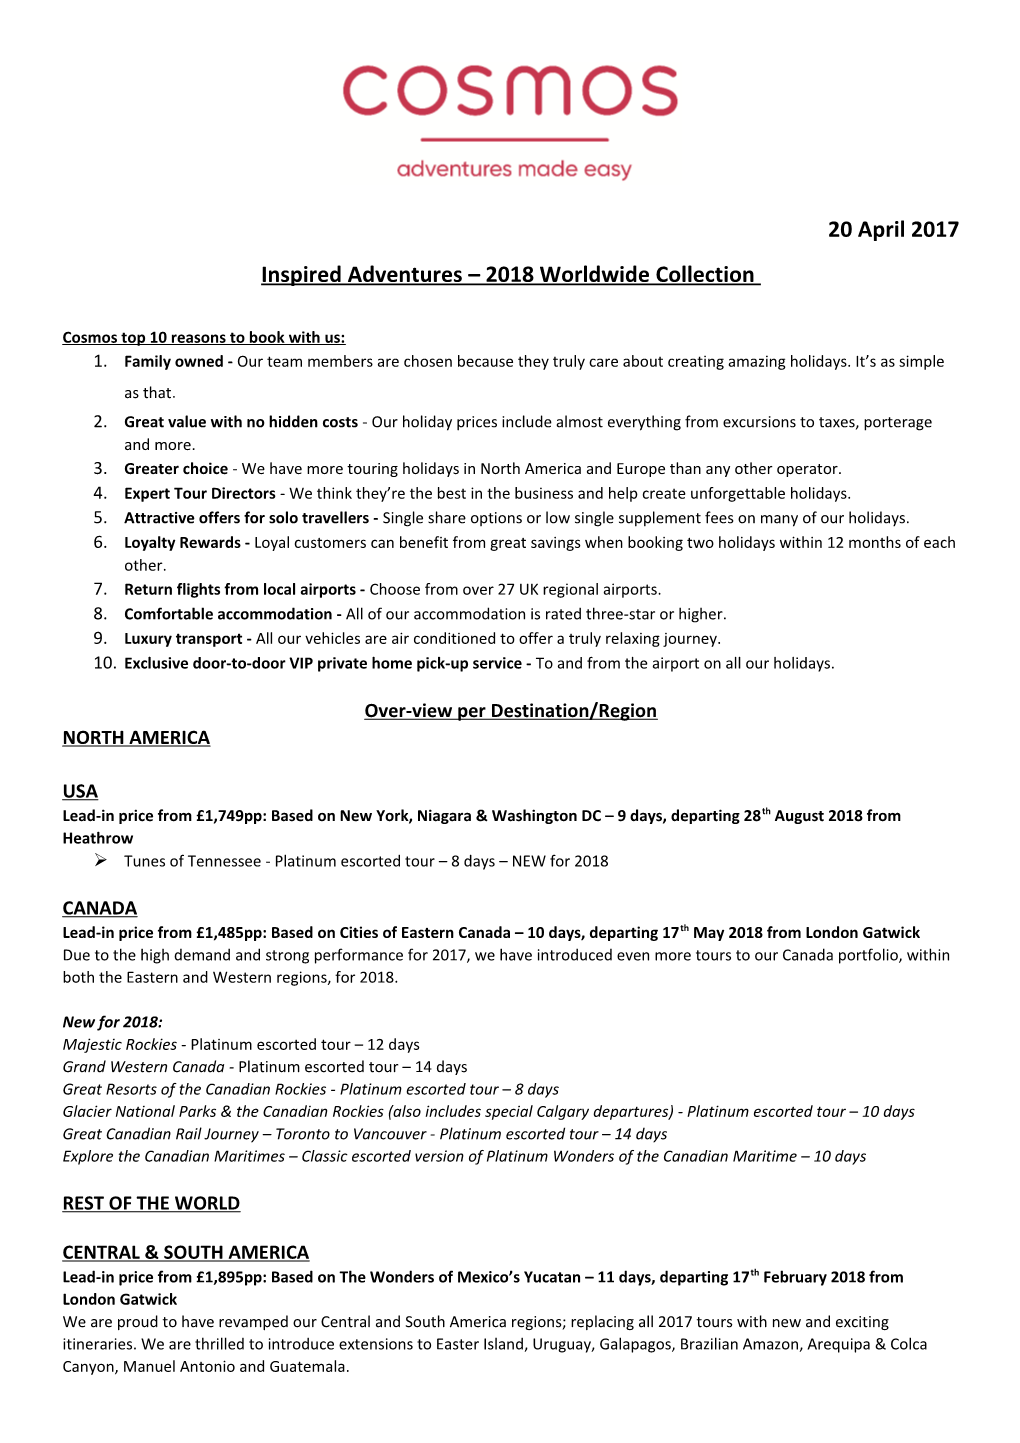 Inspired Adventures 2018 Worldwide Collection